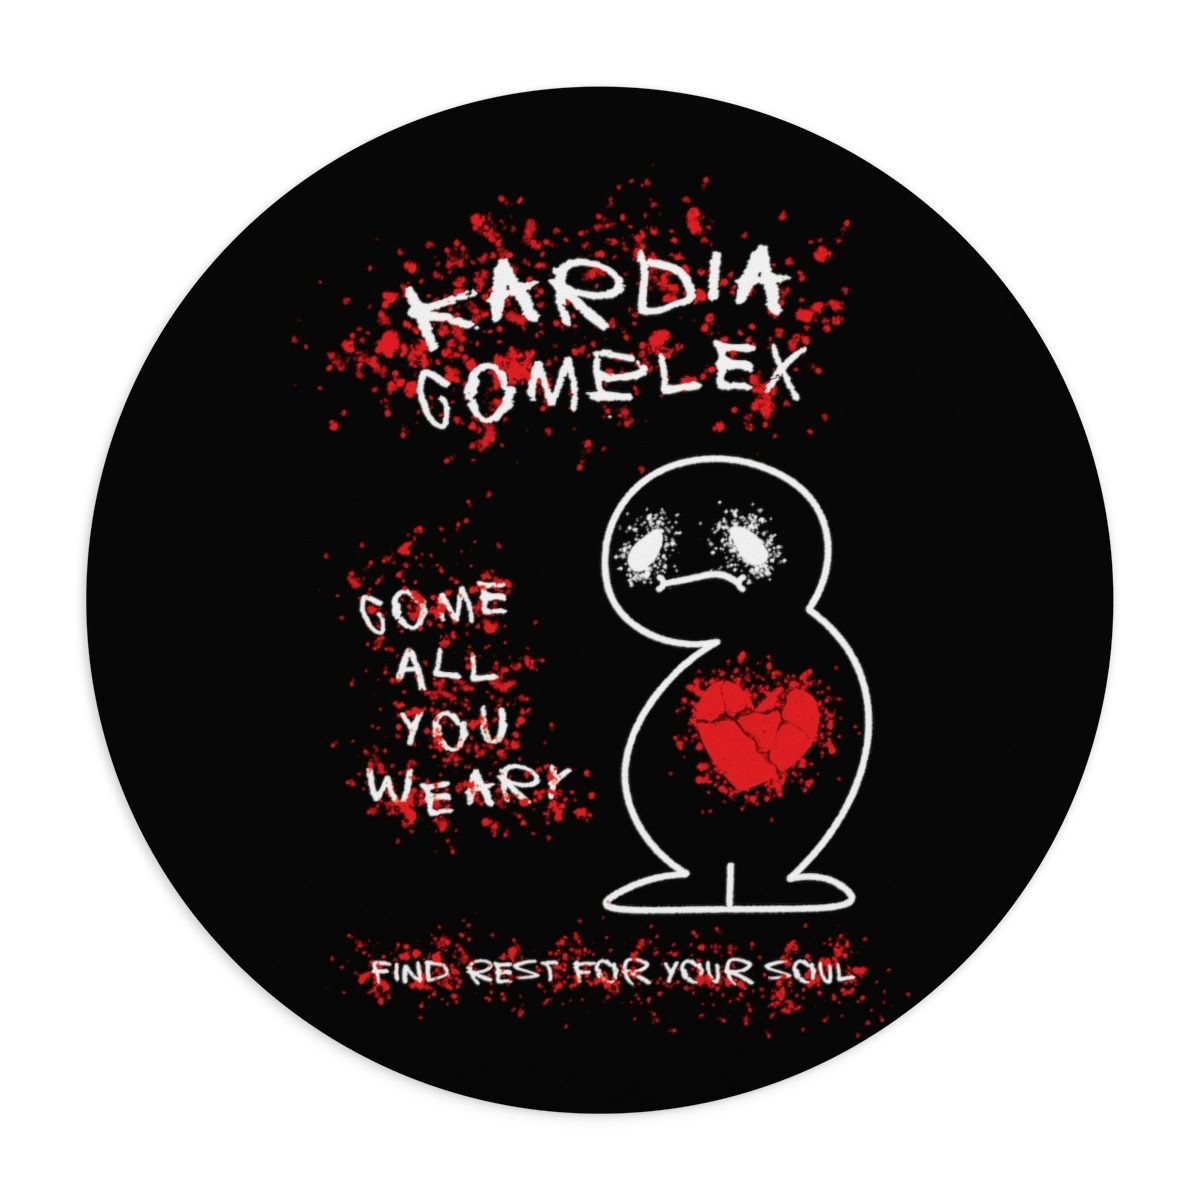 Kardia Complex – Come All You Weary Rectangular and Round Mousepads